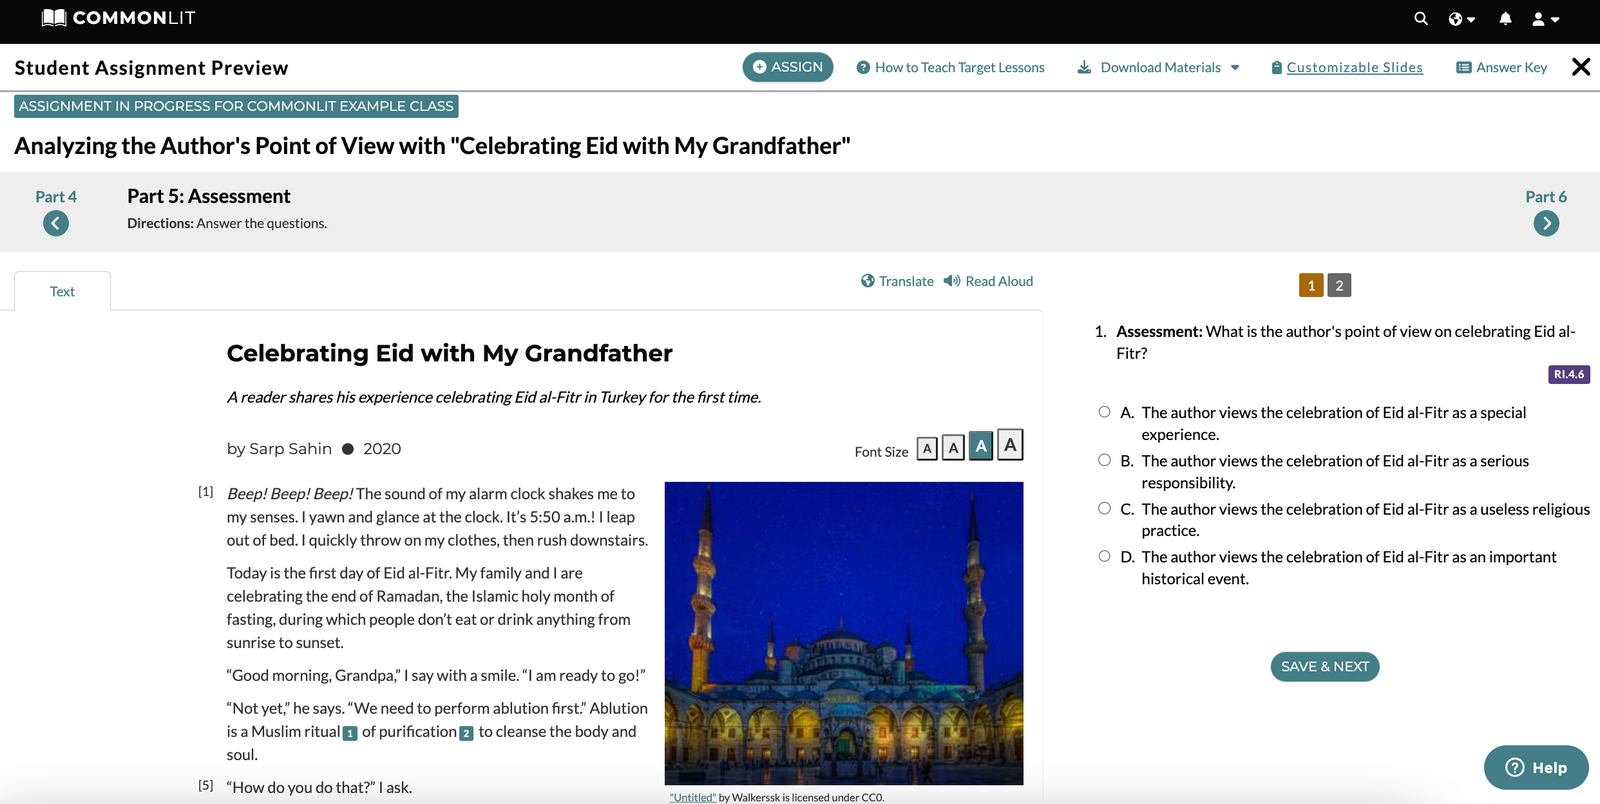 This Target Lesson will help students analyze the author's point of view during your lesson on Ramadan.